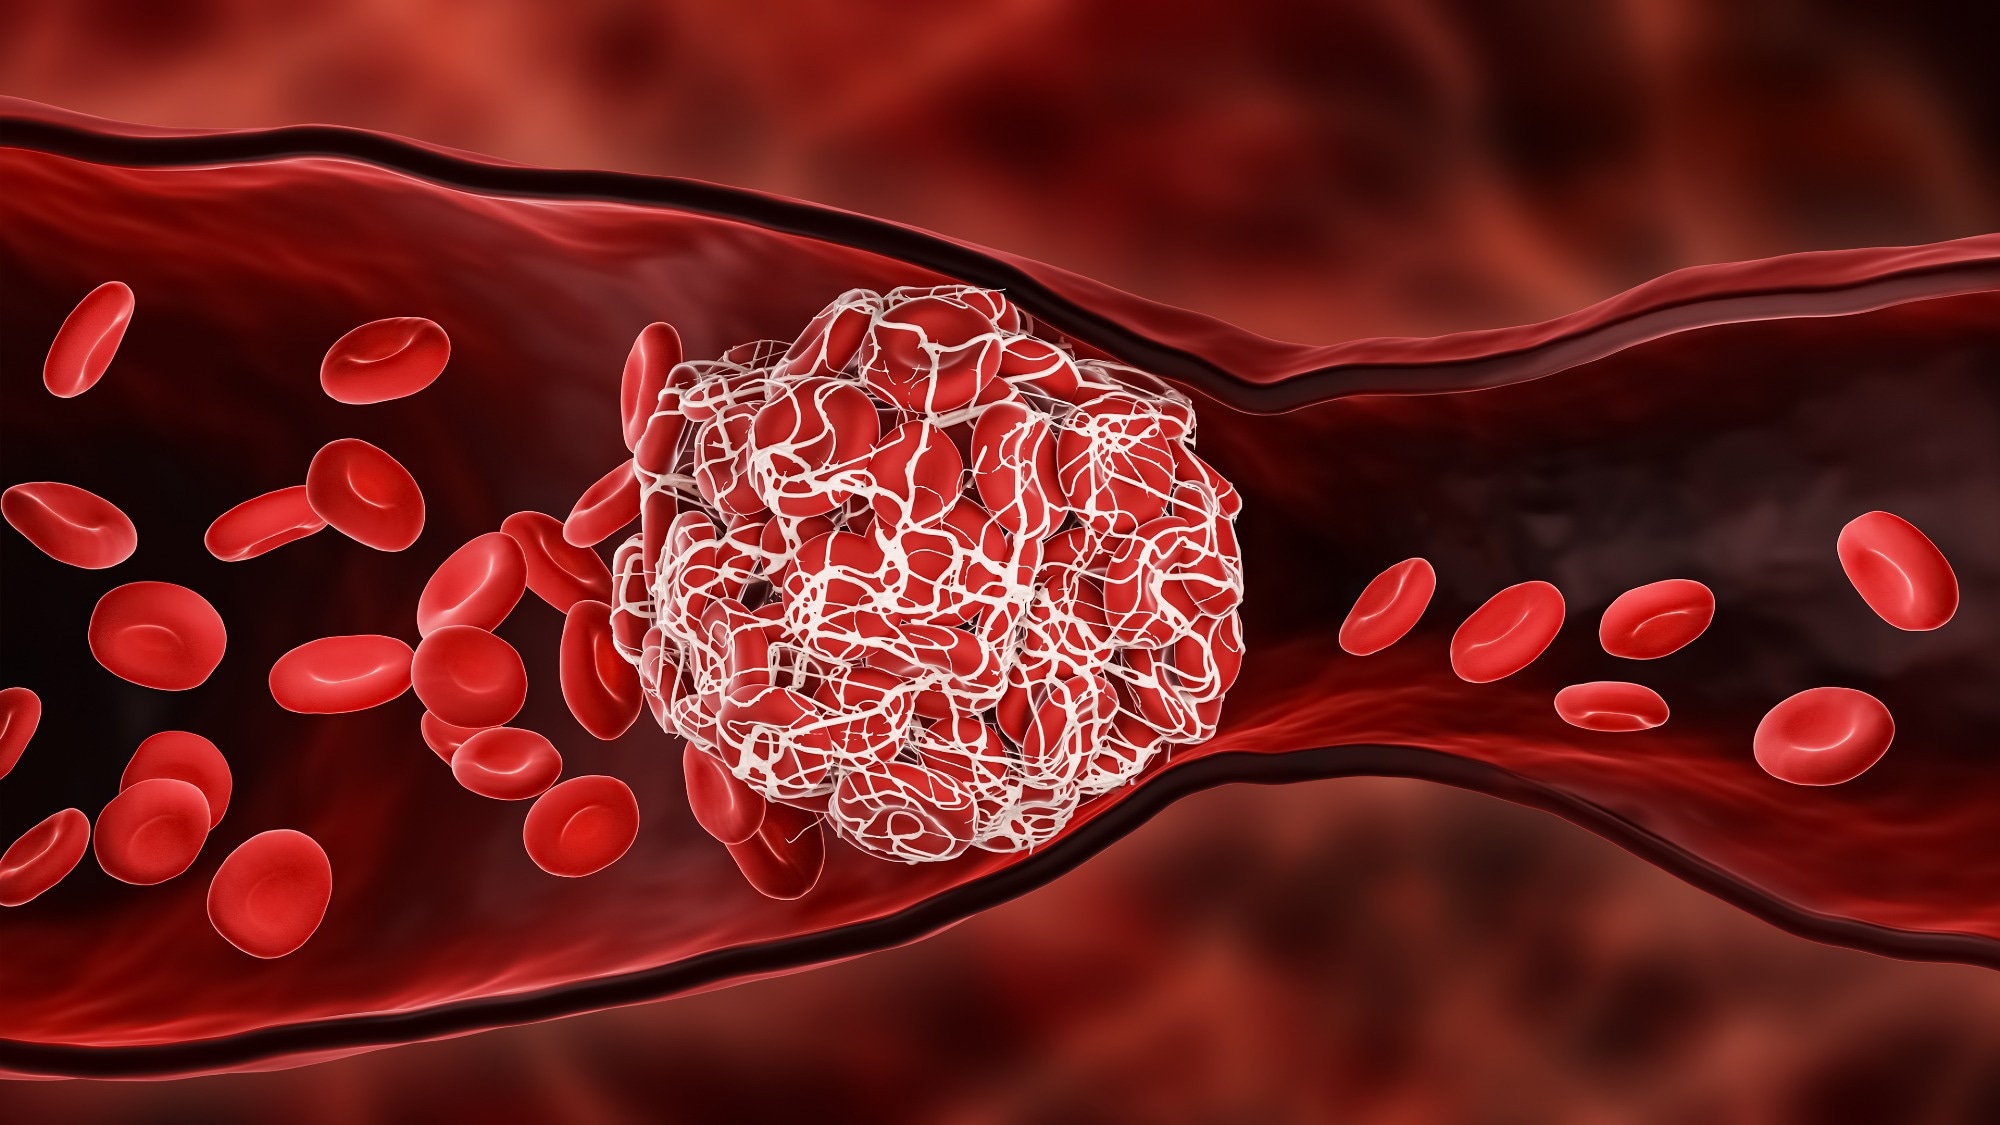 Study: COVID-19 associated coagulopathy and thrombosis in cancer. Image Credit: MattLphotography/Shutterstock